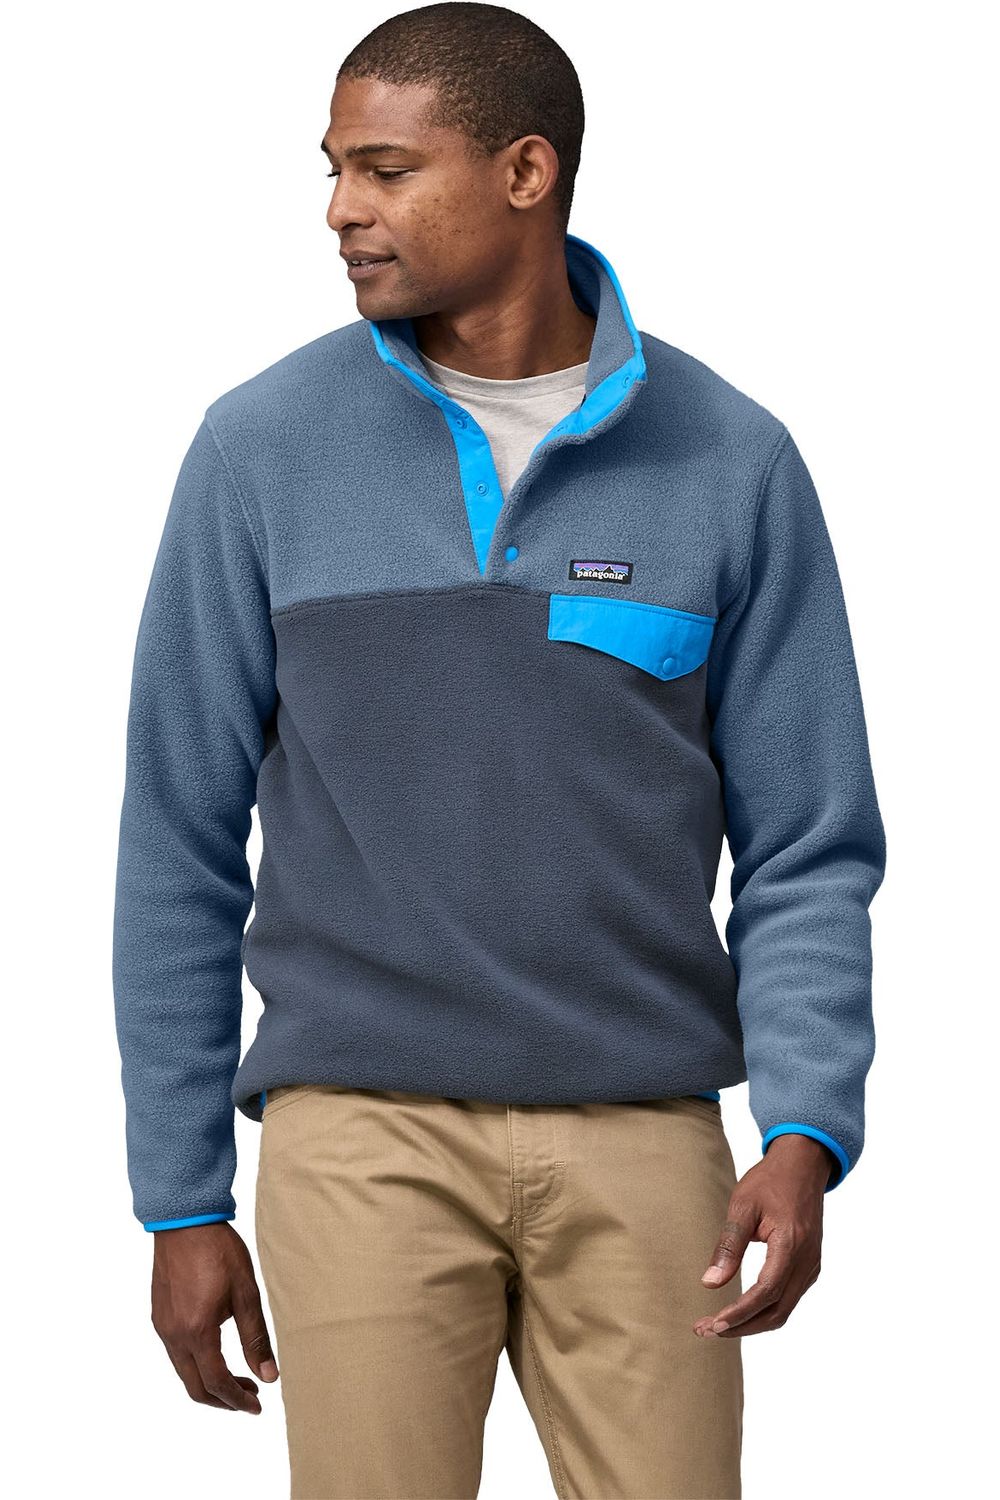 Patagonia Men's LW Synch Snap-T Pullover Smolder Blue